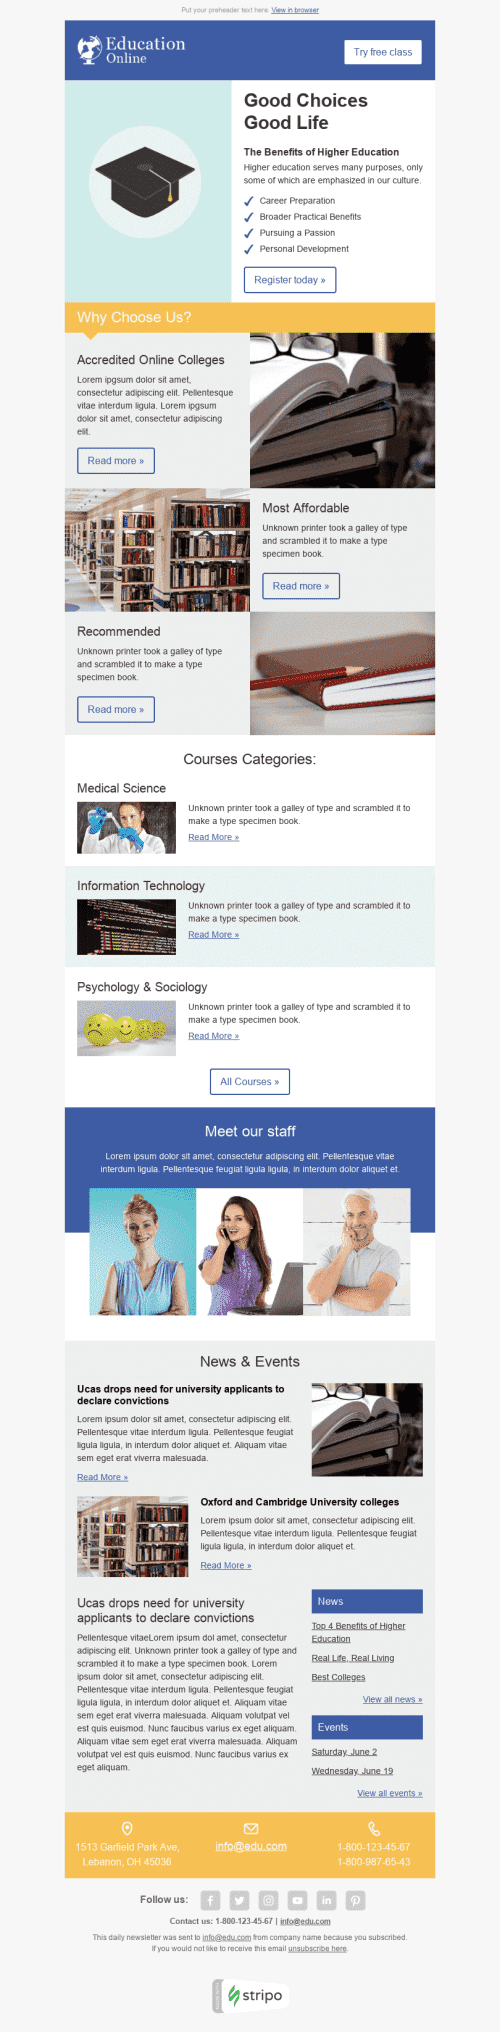 Promo Email Template "Good Choices" for Education industry mobile view